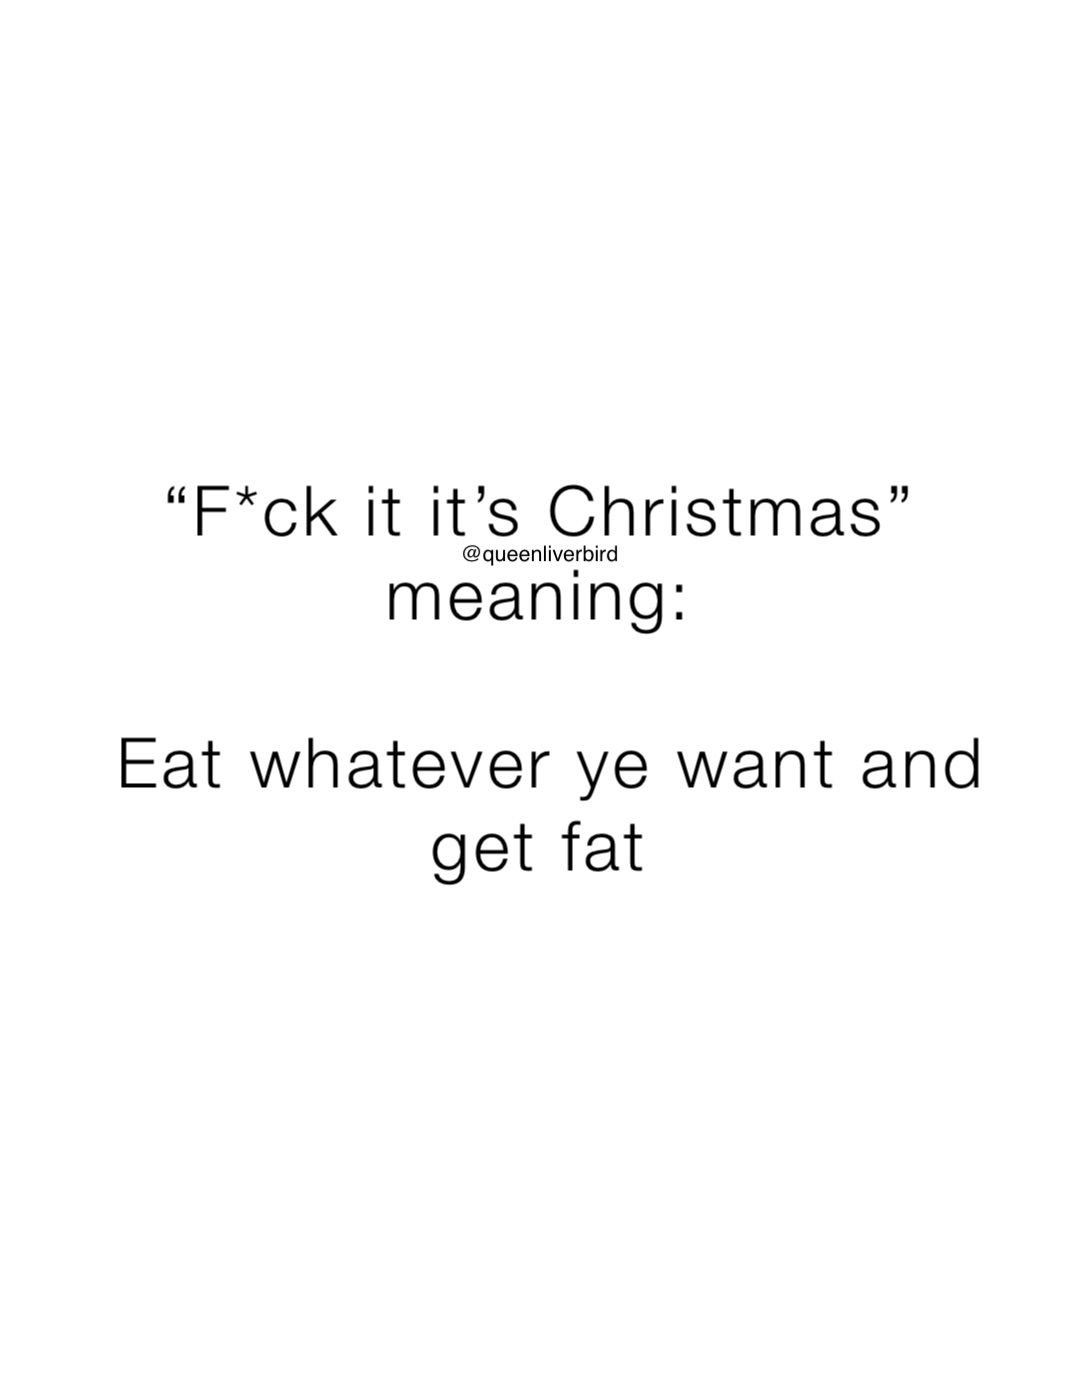 “F*ck it it’s Christmas”
meaning:

Eat whatever ye want and get fat @queenliverbird